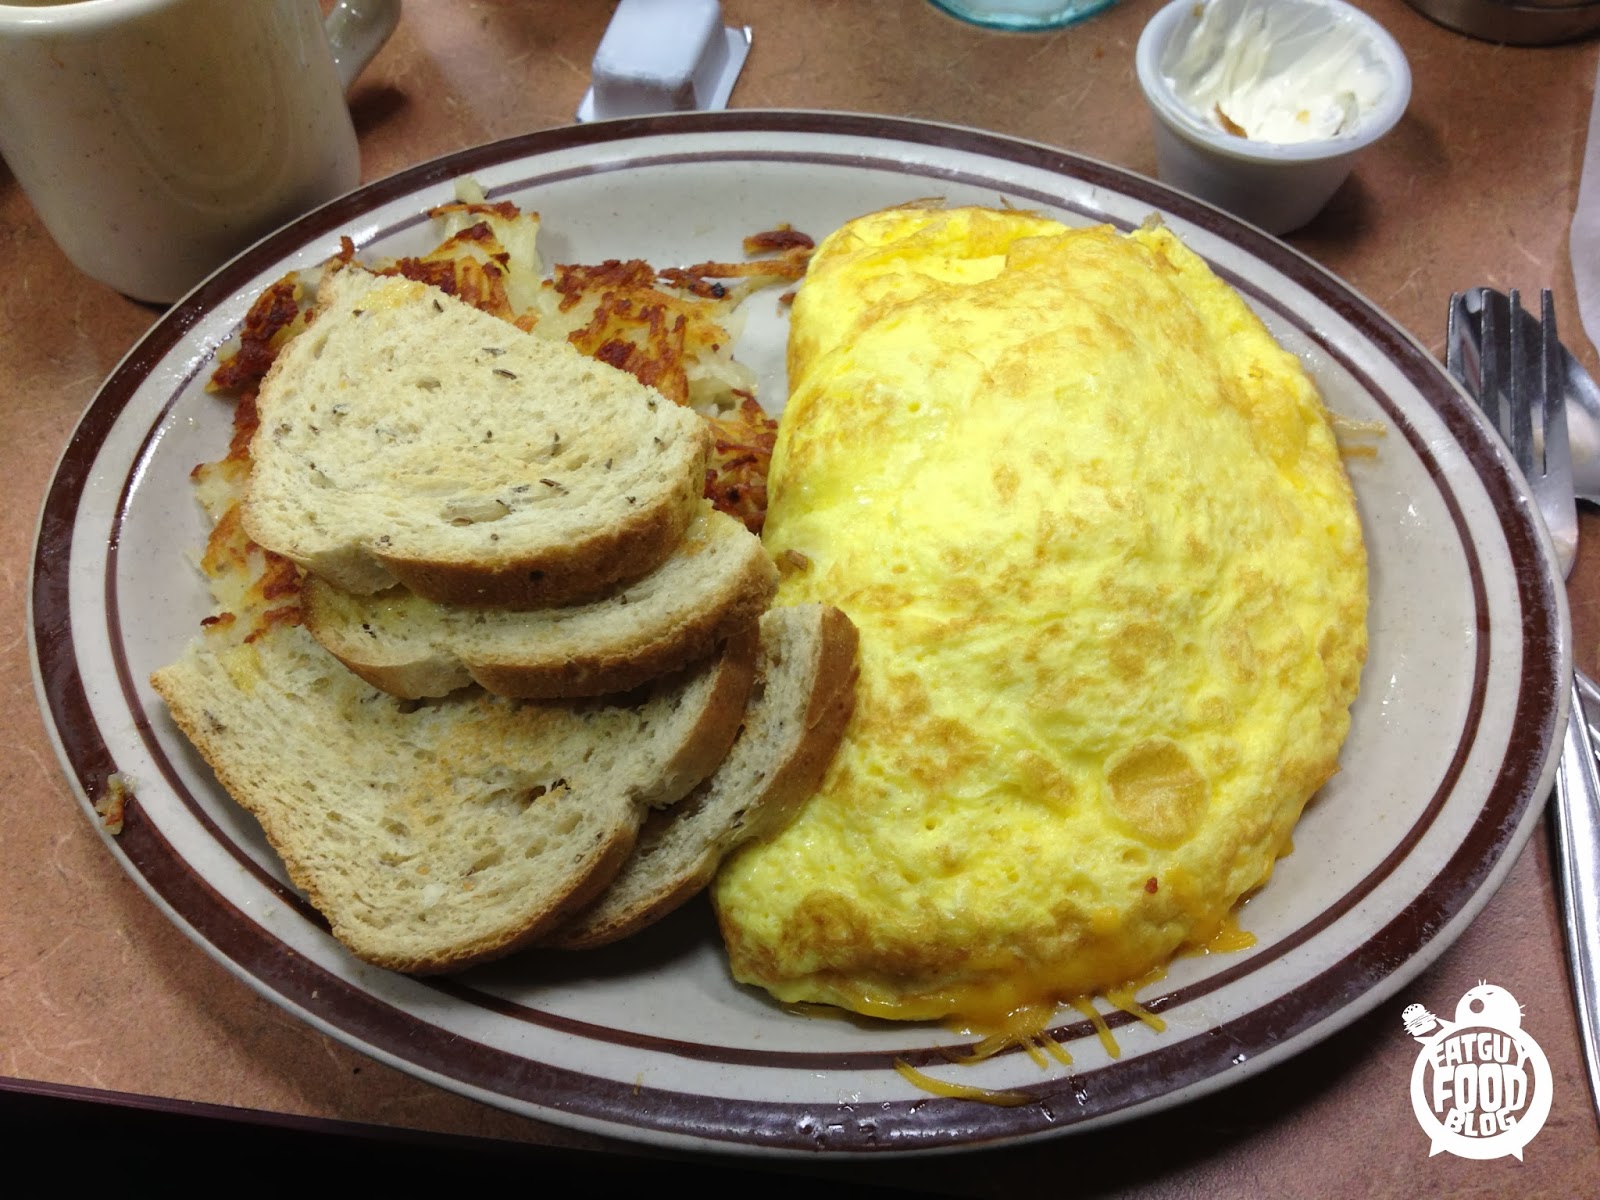 Inspired By An Omelet: The Attraction of Denny's For Seniors